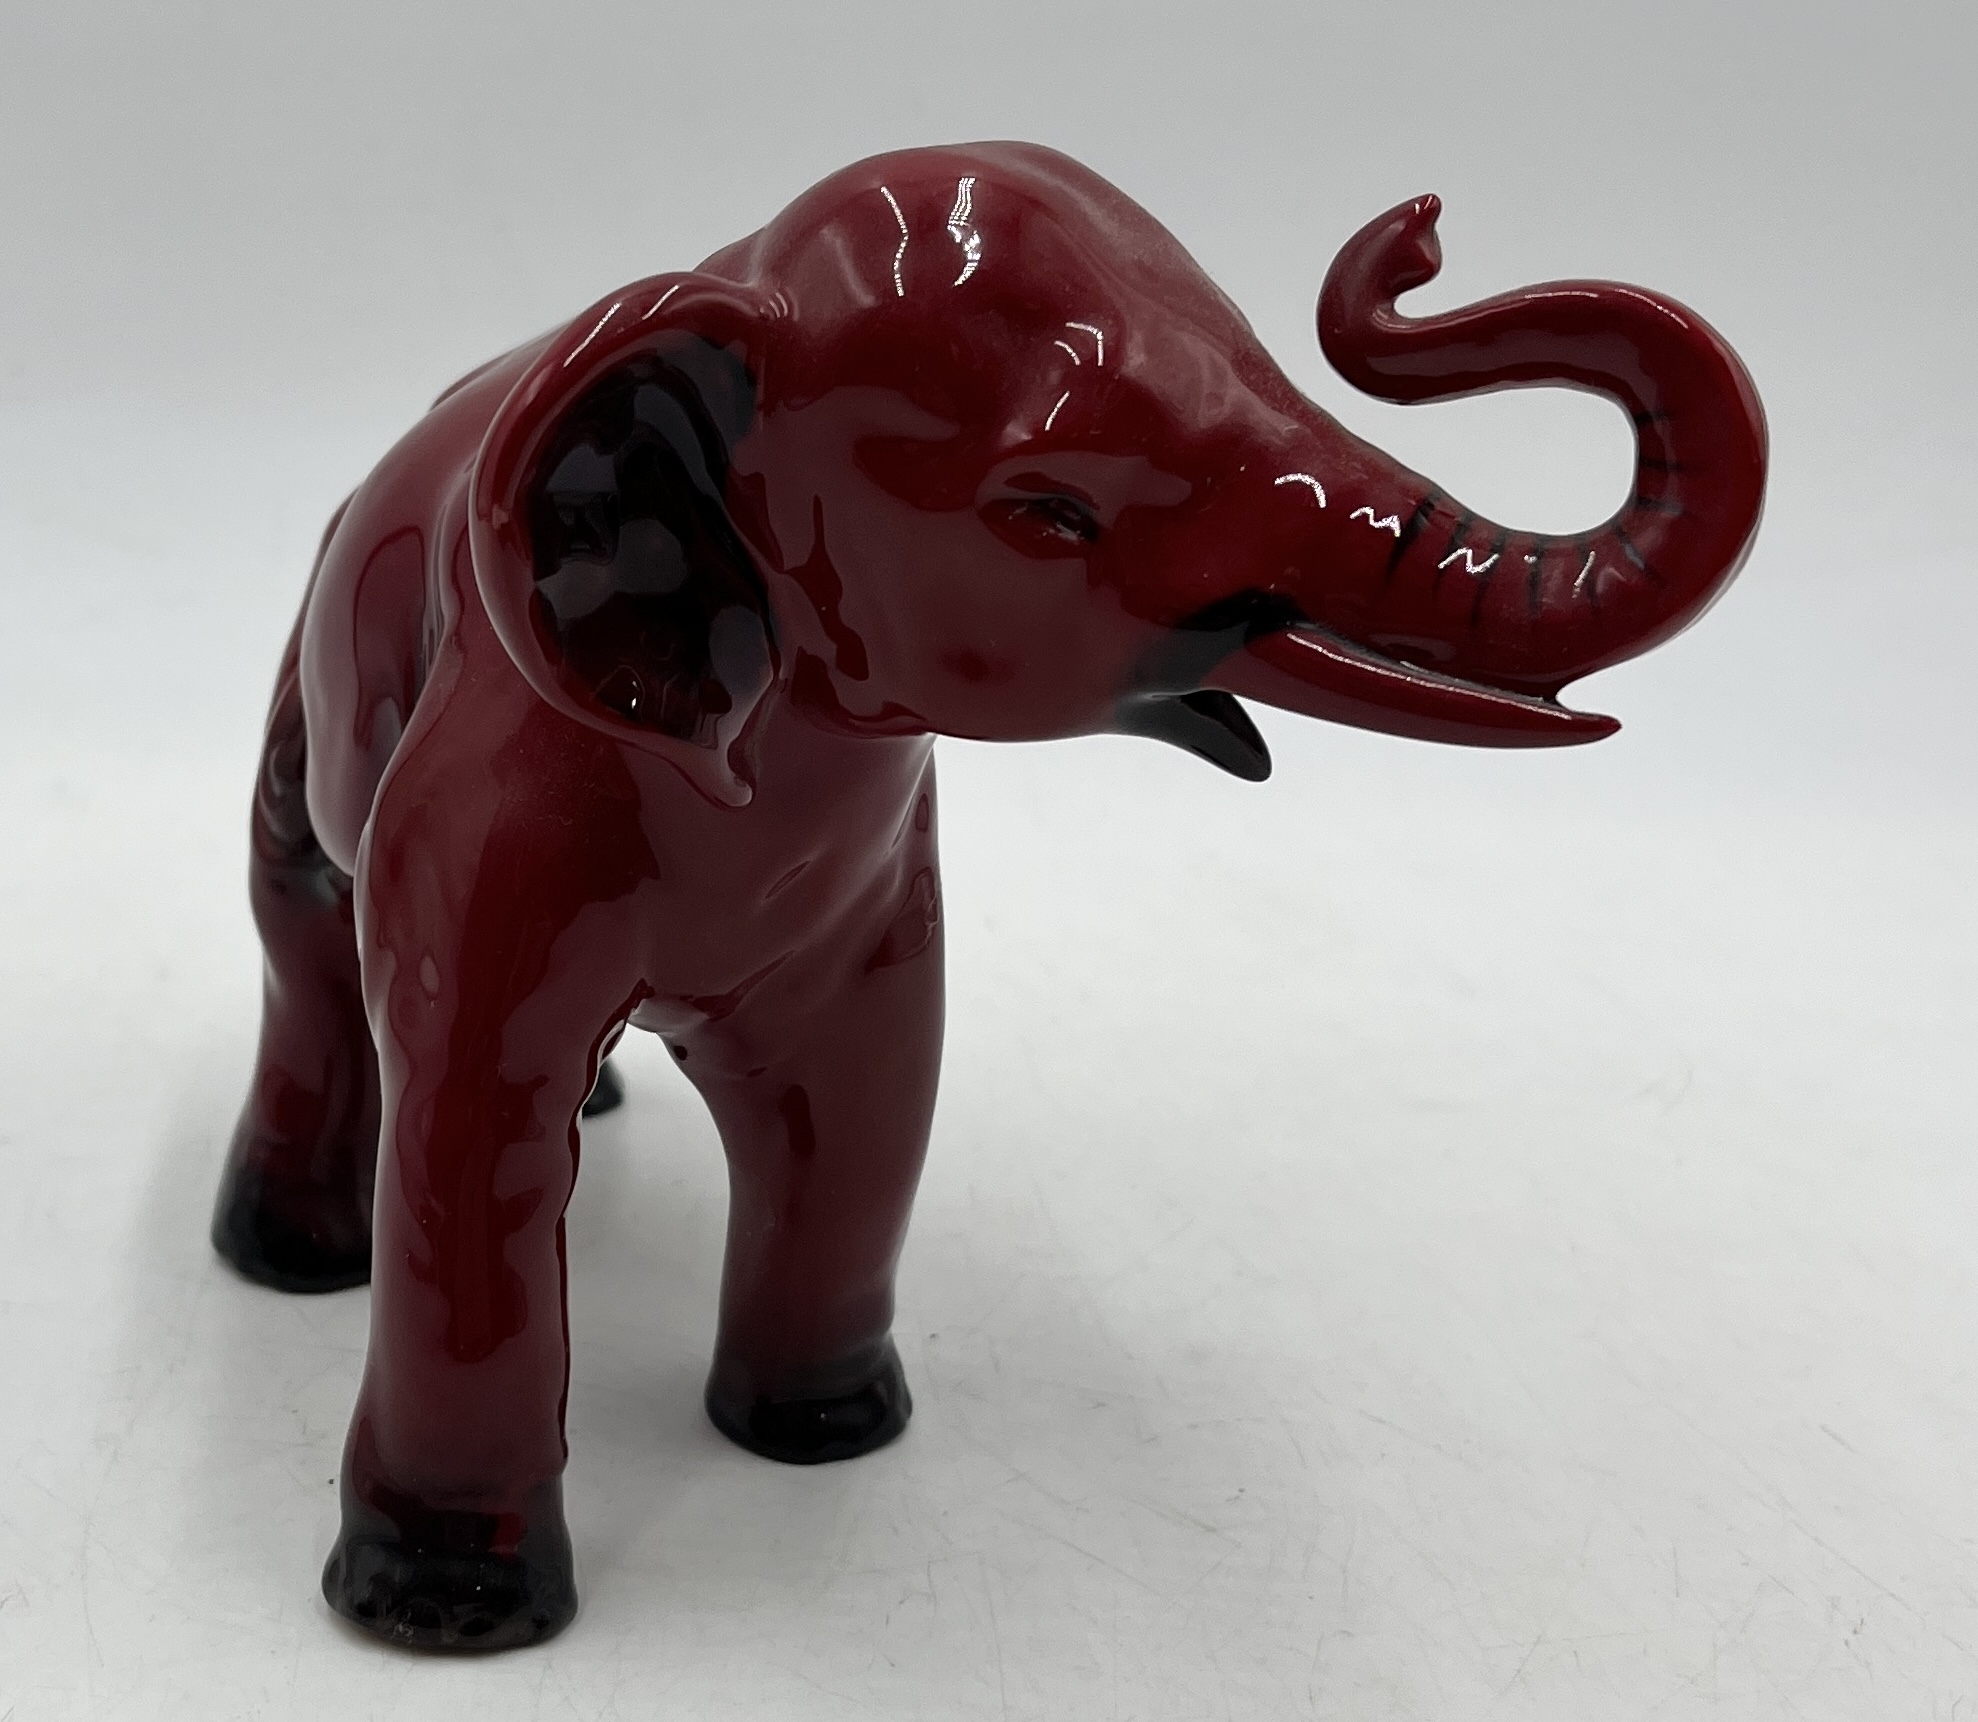 A Royal Doulton Flambe elephant with raised trunk signed by Michael Doulton in gold to the base - Image 2 of 4